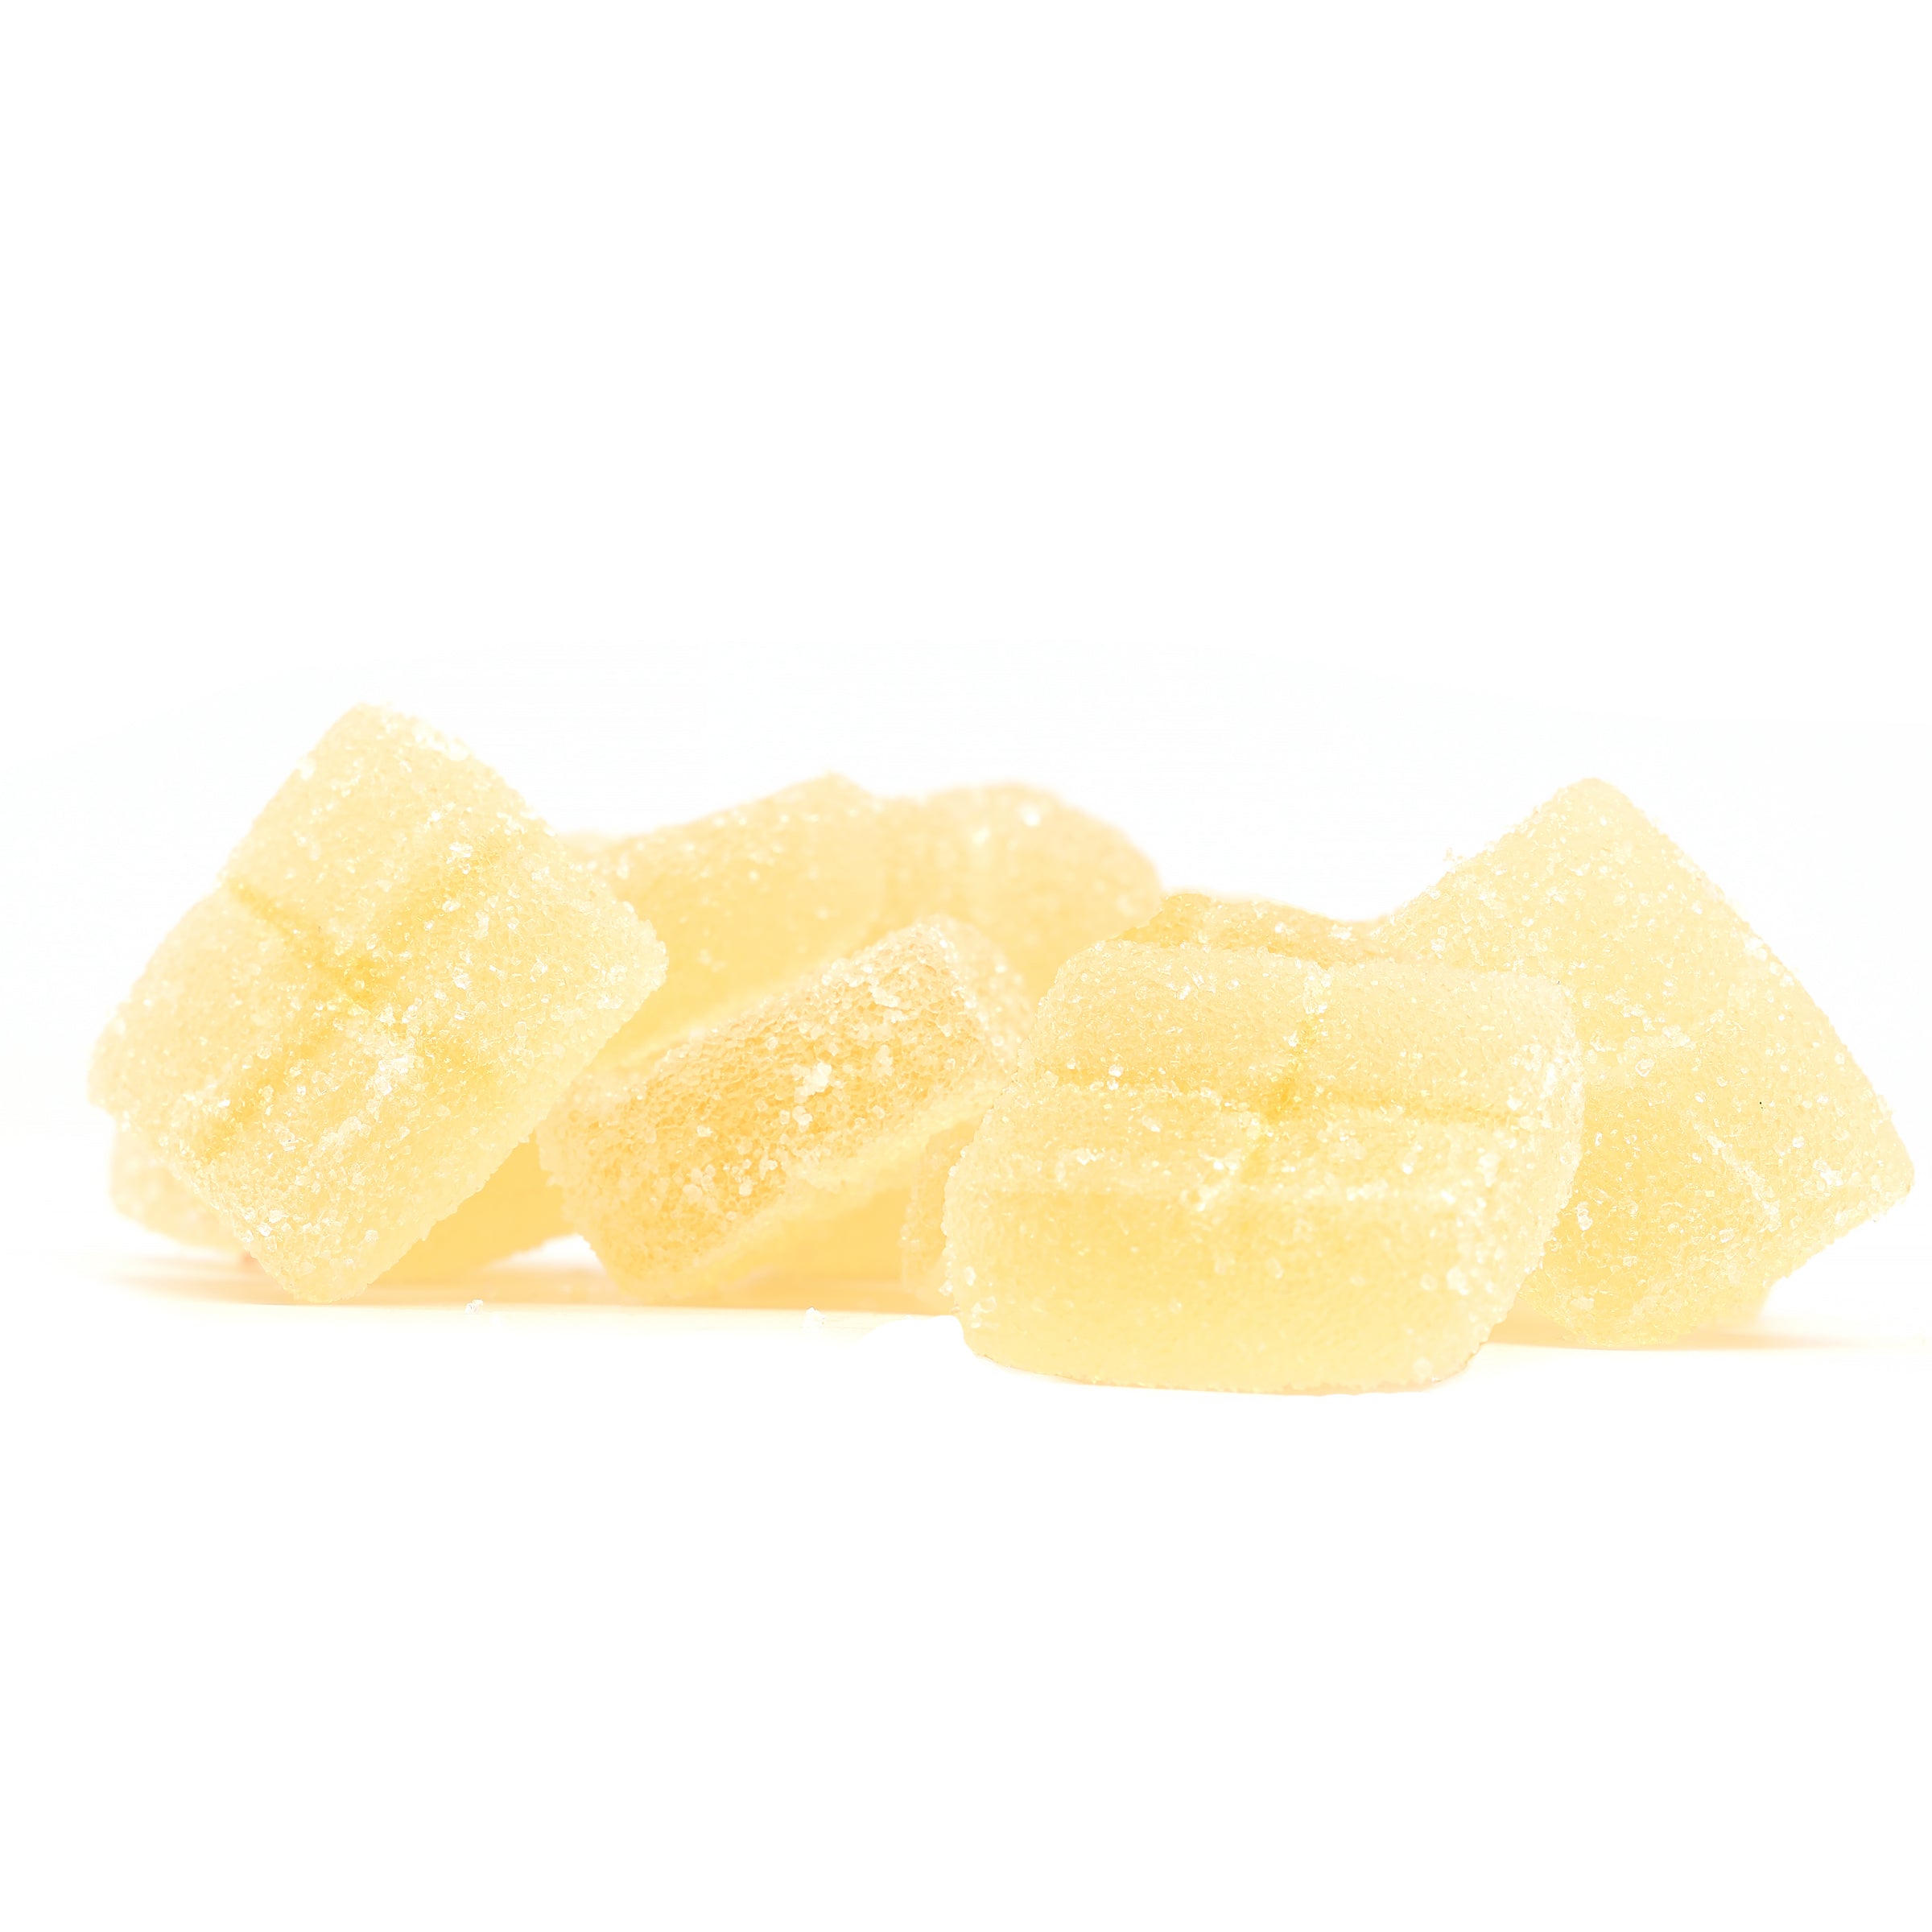 Pineapple Delta-9 Microdose Gummies: 10 Pack from Botany Farms